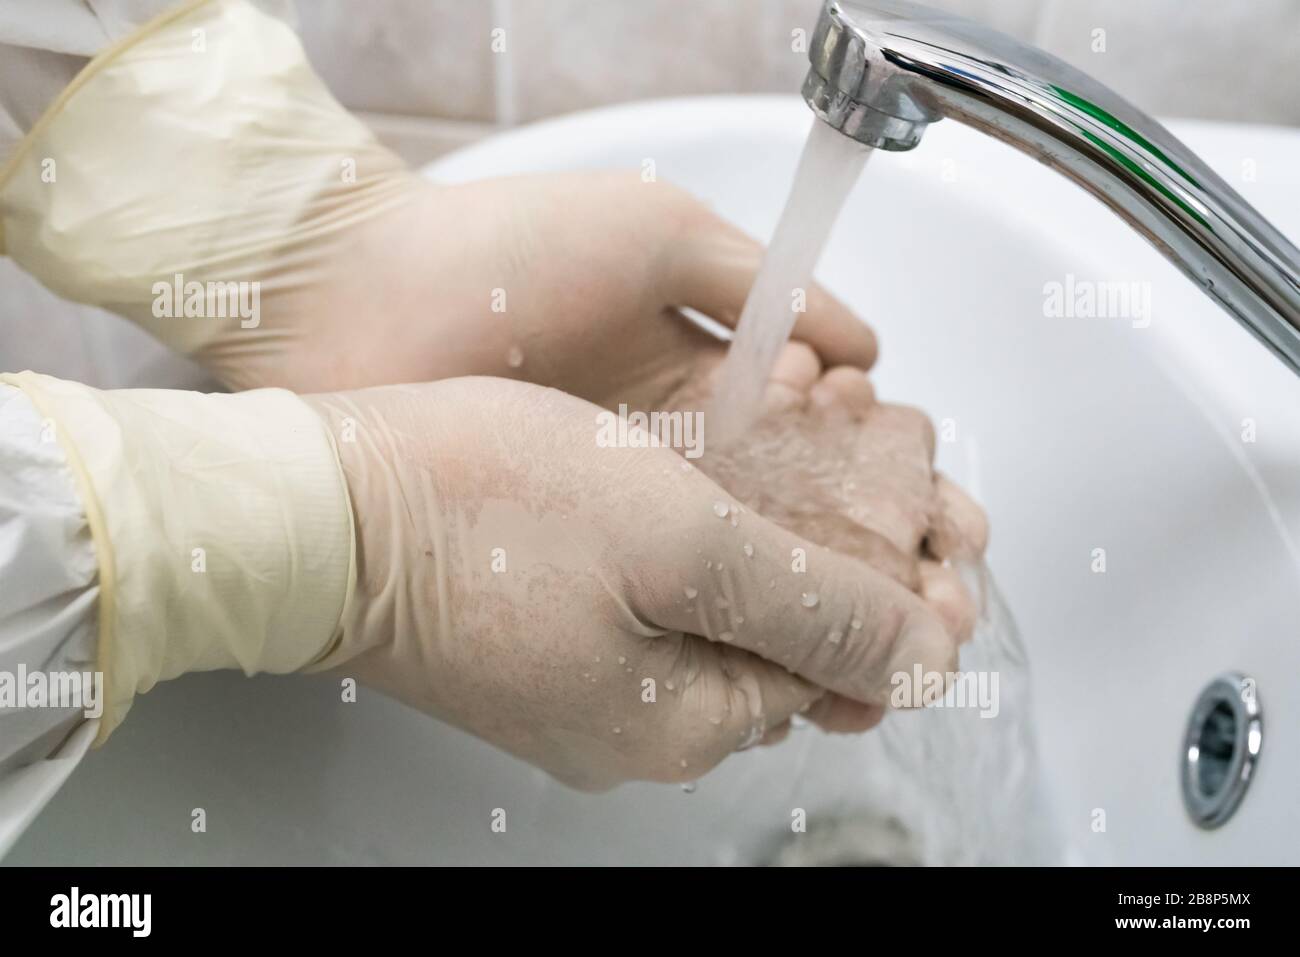 Surgeon washes and processes hands with white rubber gloves. Medical desinfection. Stock Photo